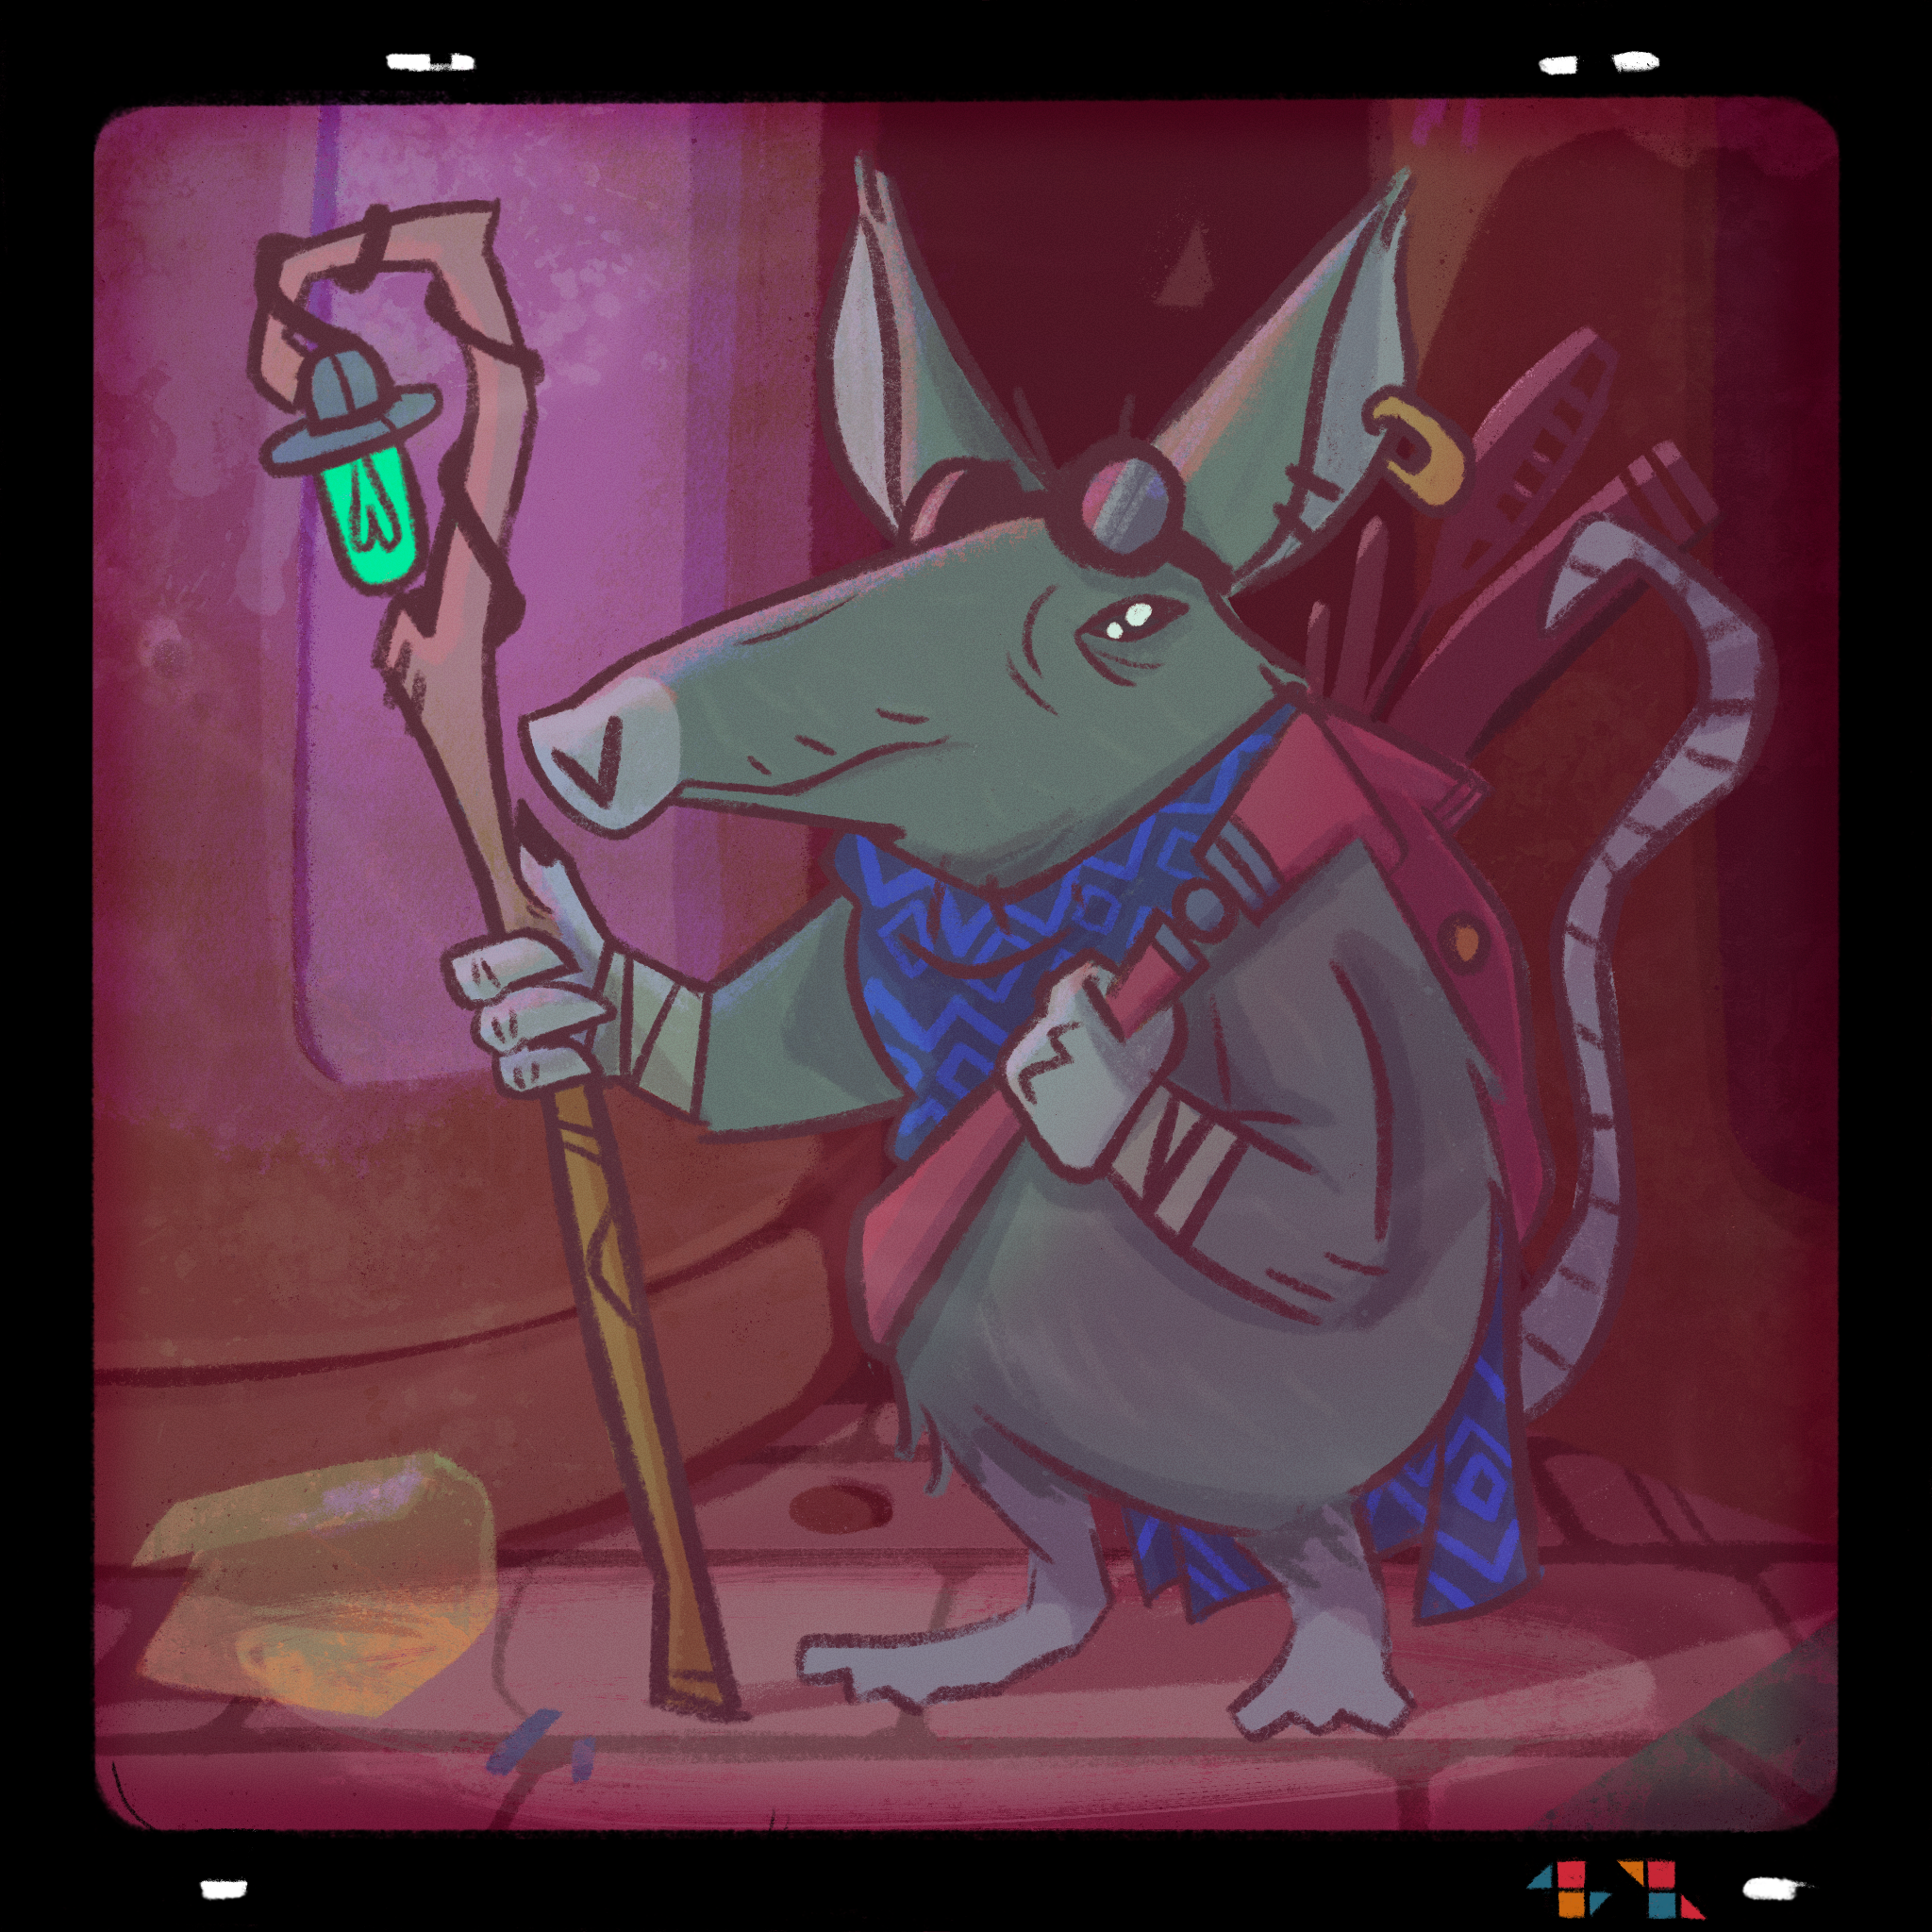 A digital drawing of a small, furry alien with a long snout, large ears and a rat-like tail. They have a bag on their bag and are wearing a cloak, and hold a staff with a light attached.